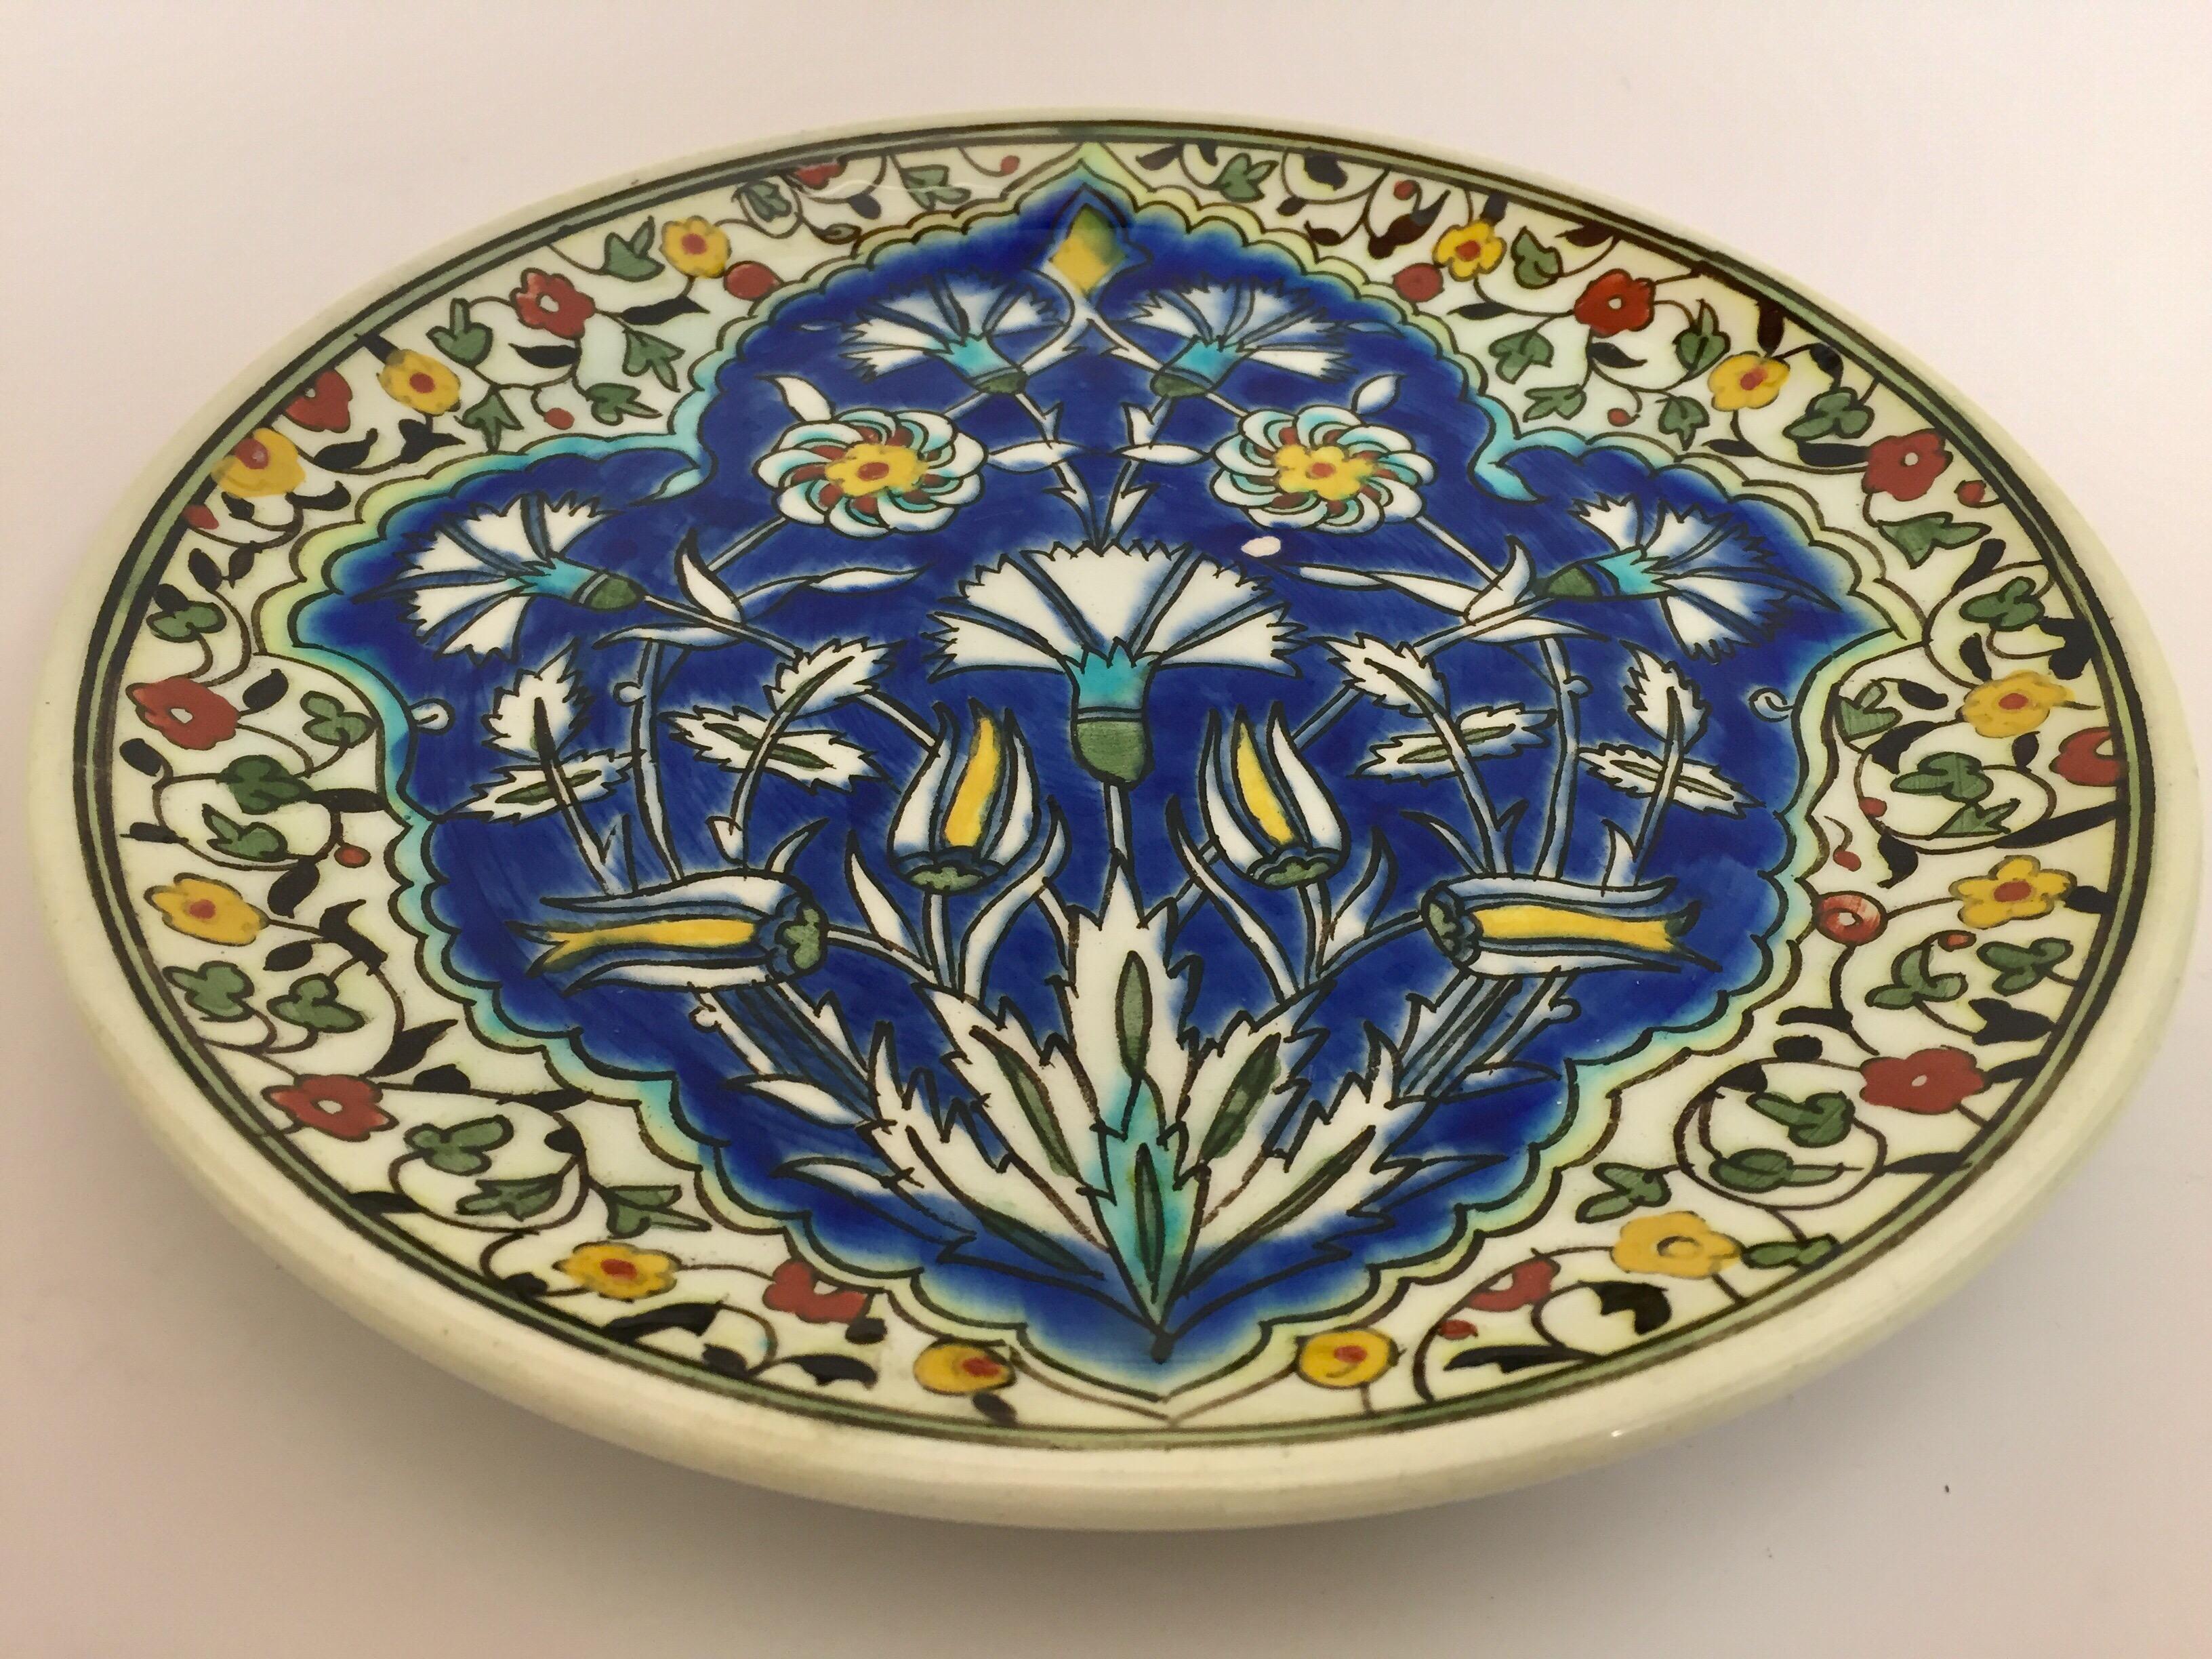 Hand-Painted Polychrome Hand Painted Ceramic Decorative Plate with Moorish Floral Design For Sale